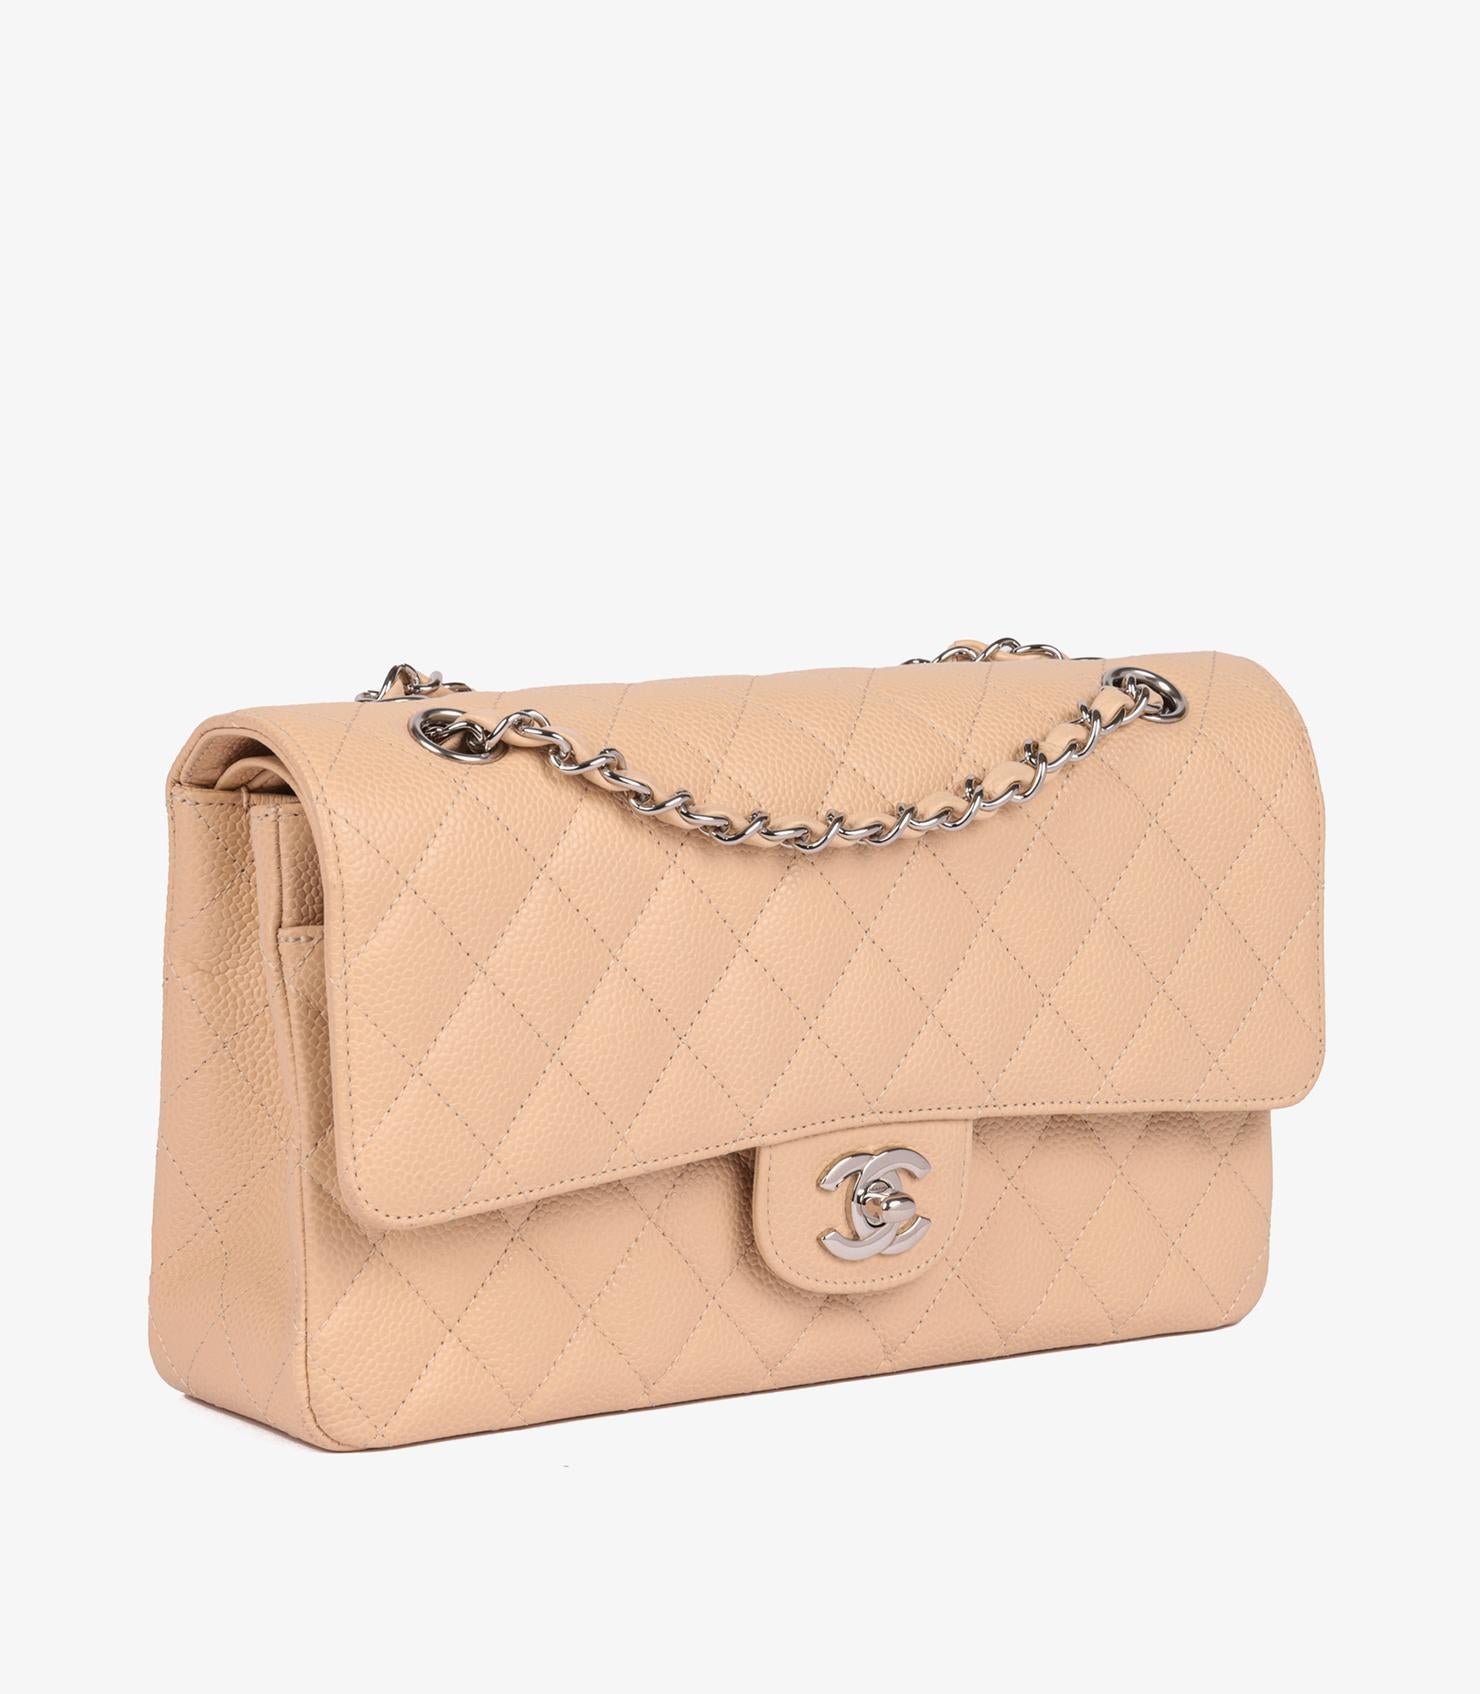 Chanel Beige Quilted Caviar Leather Medium Classic Double Flap Bag In Excellent Condition For Sale In Bishop's Stortford, Hertfordshire